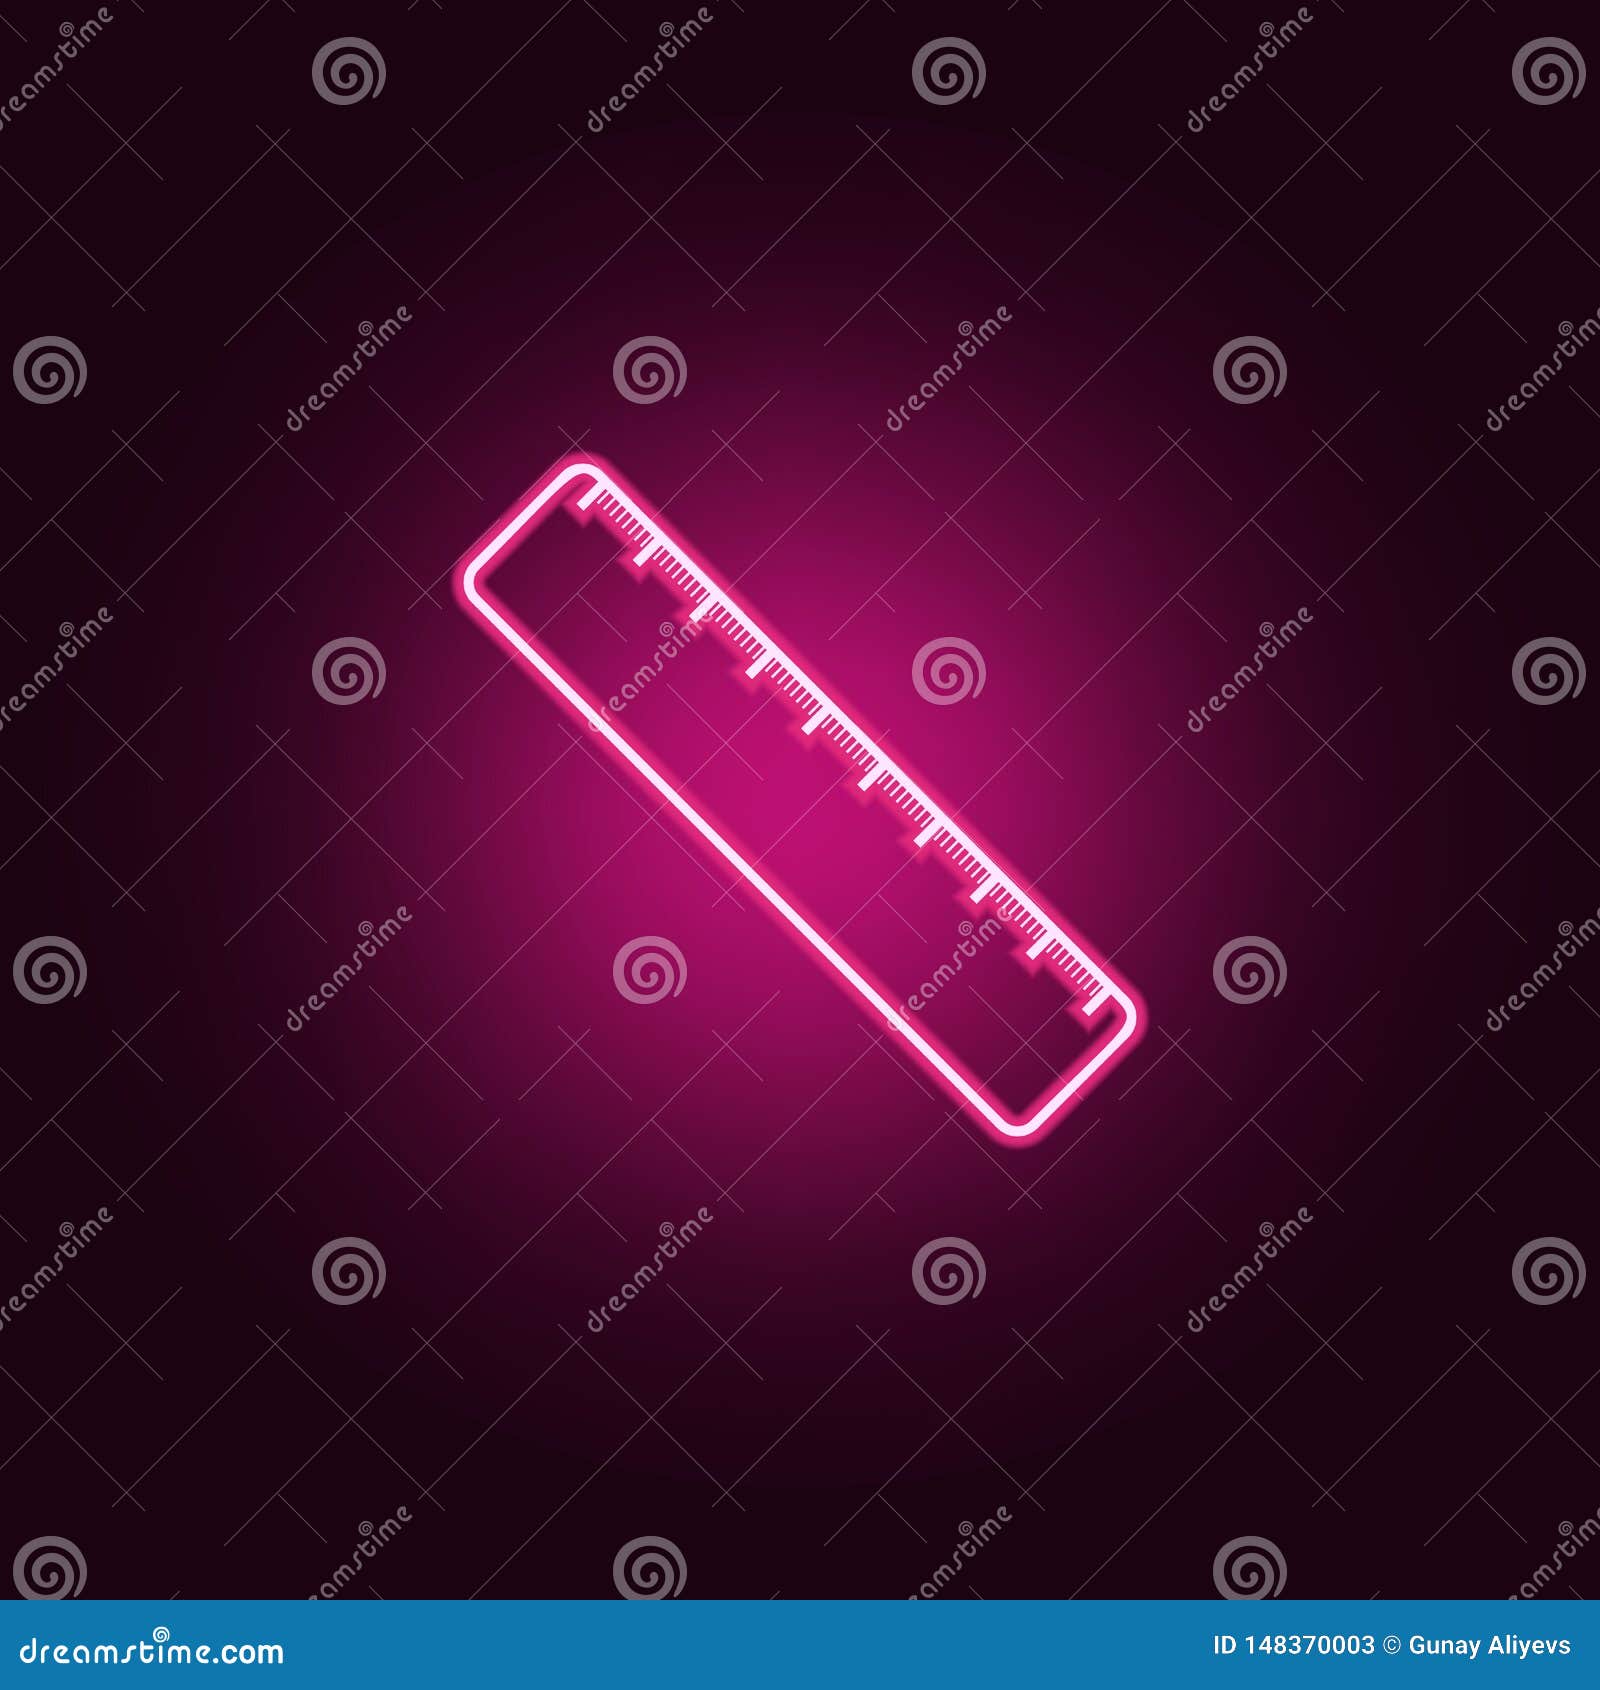 ruler neon icon. s of sciense set. simple icon for websites, web , mobile app, info graphics